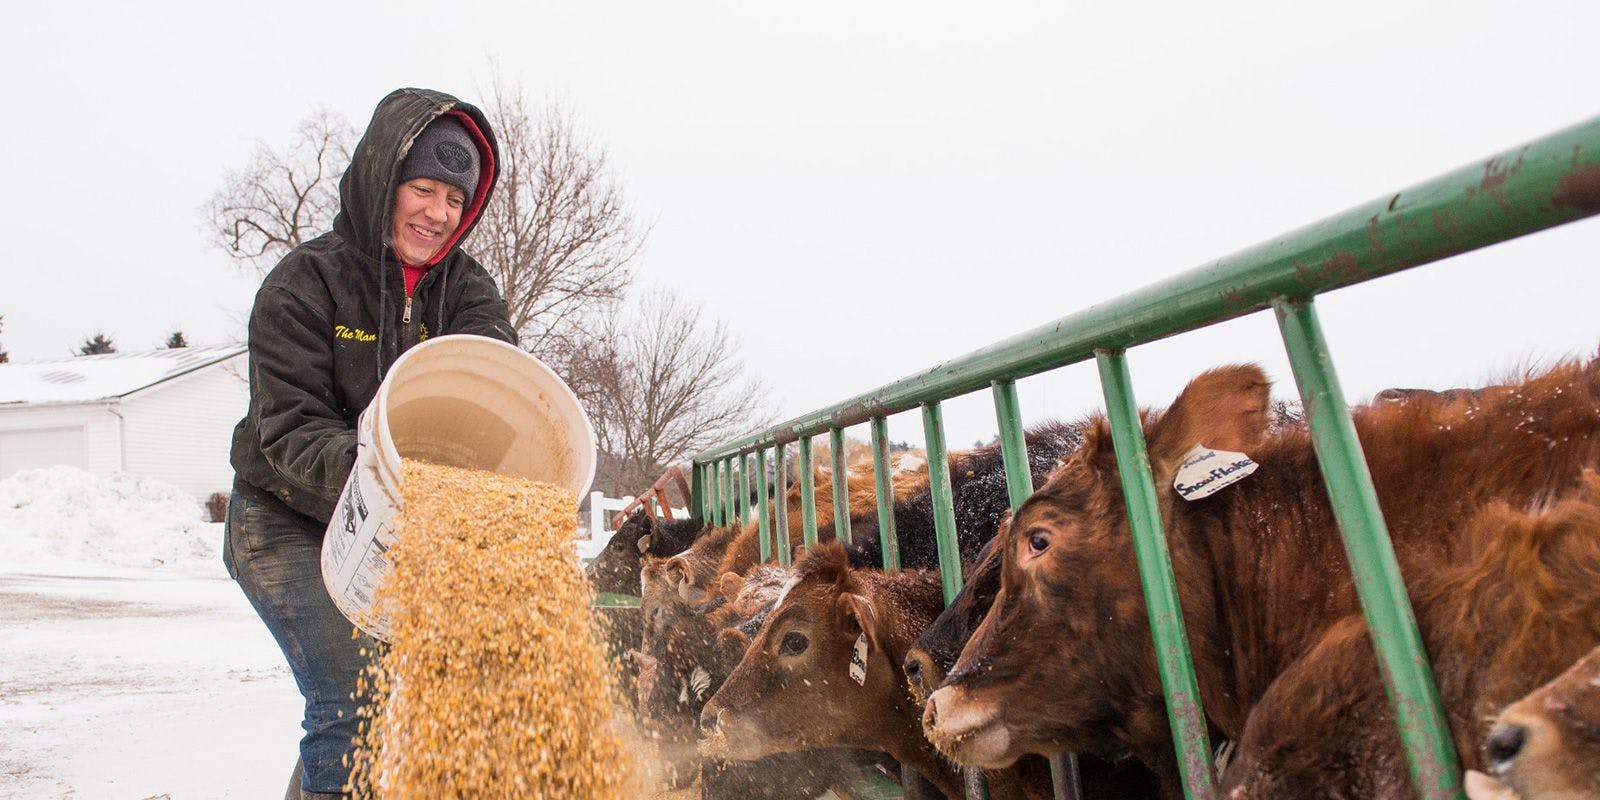 Amy Koenig gives her cows a ration of corn for extra energy in the cold winter months.